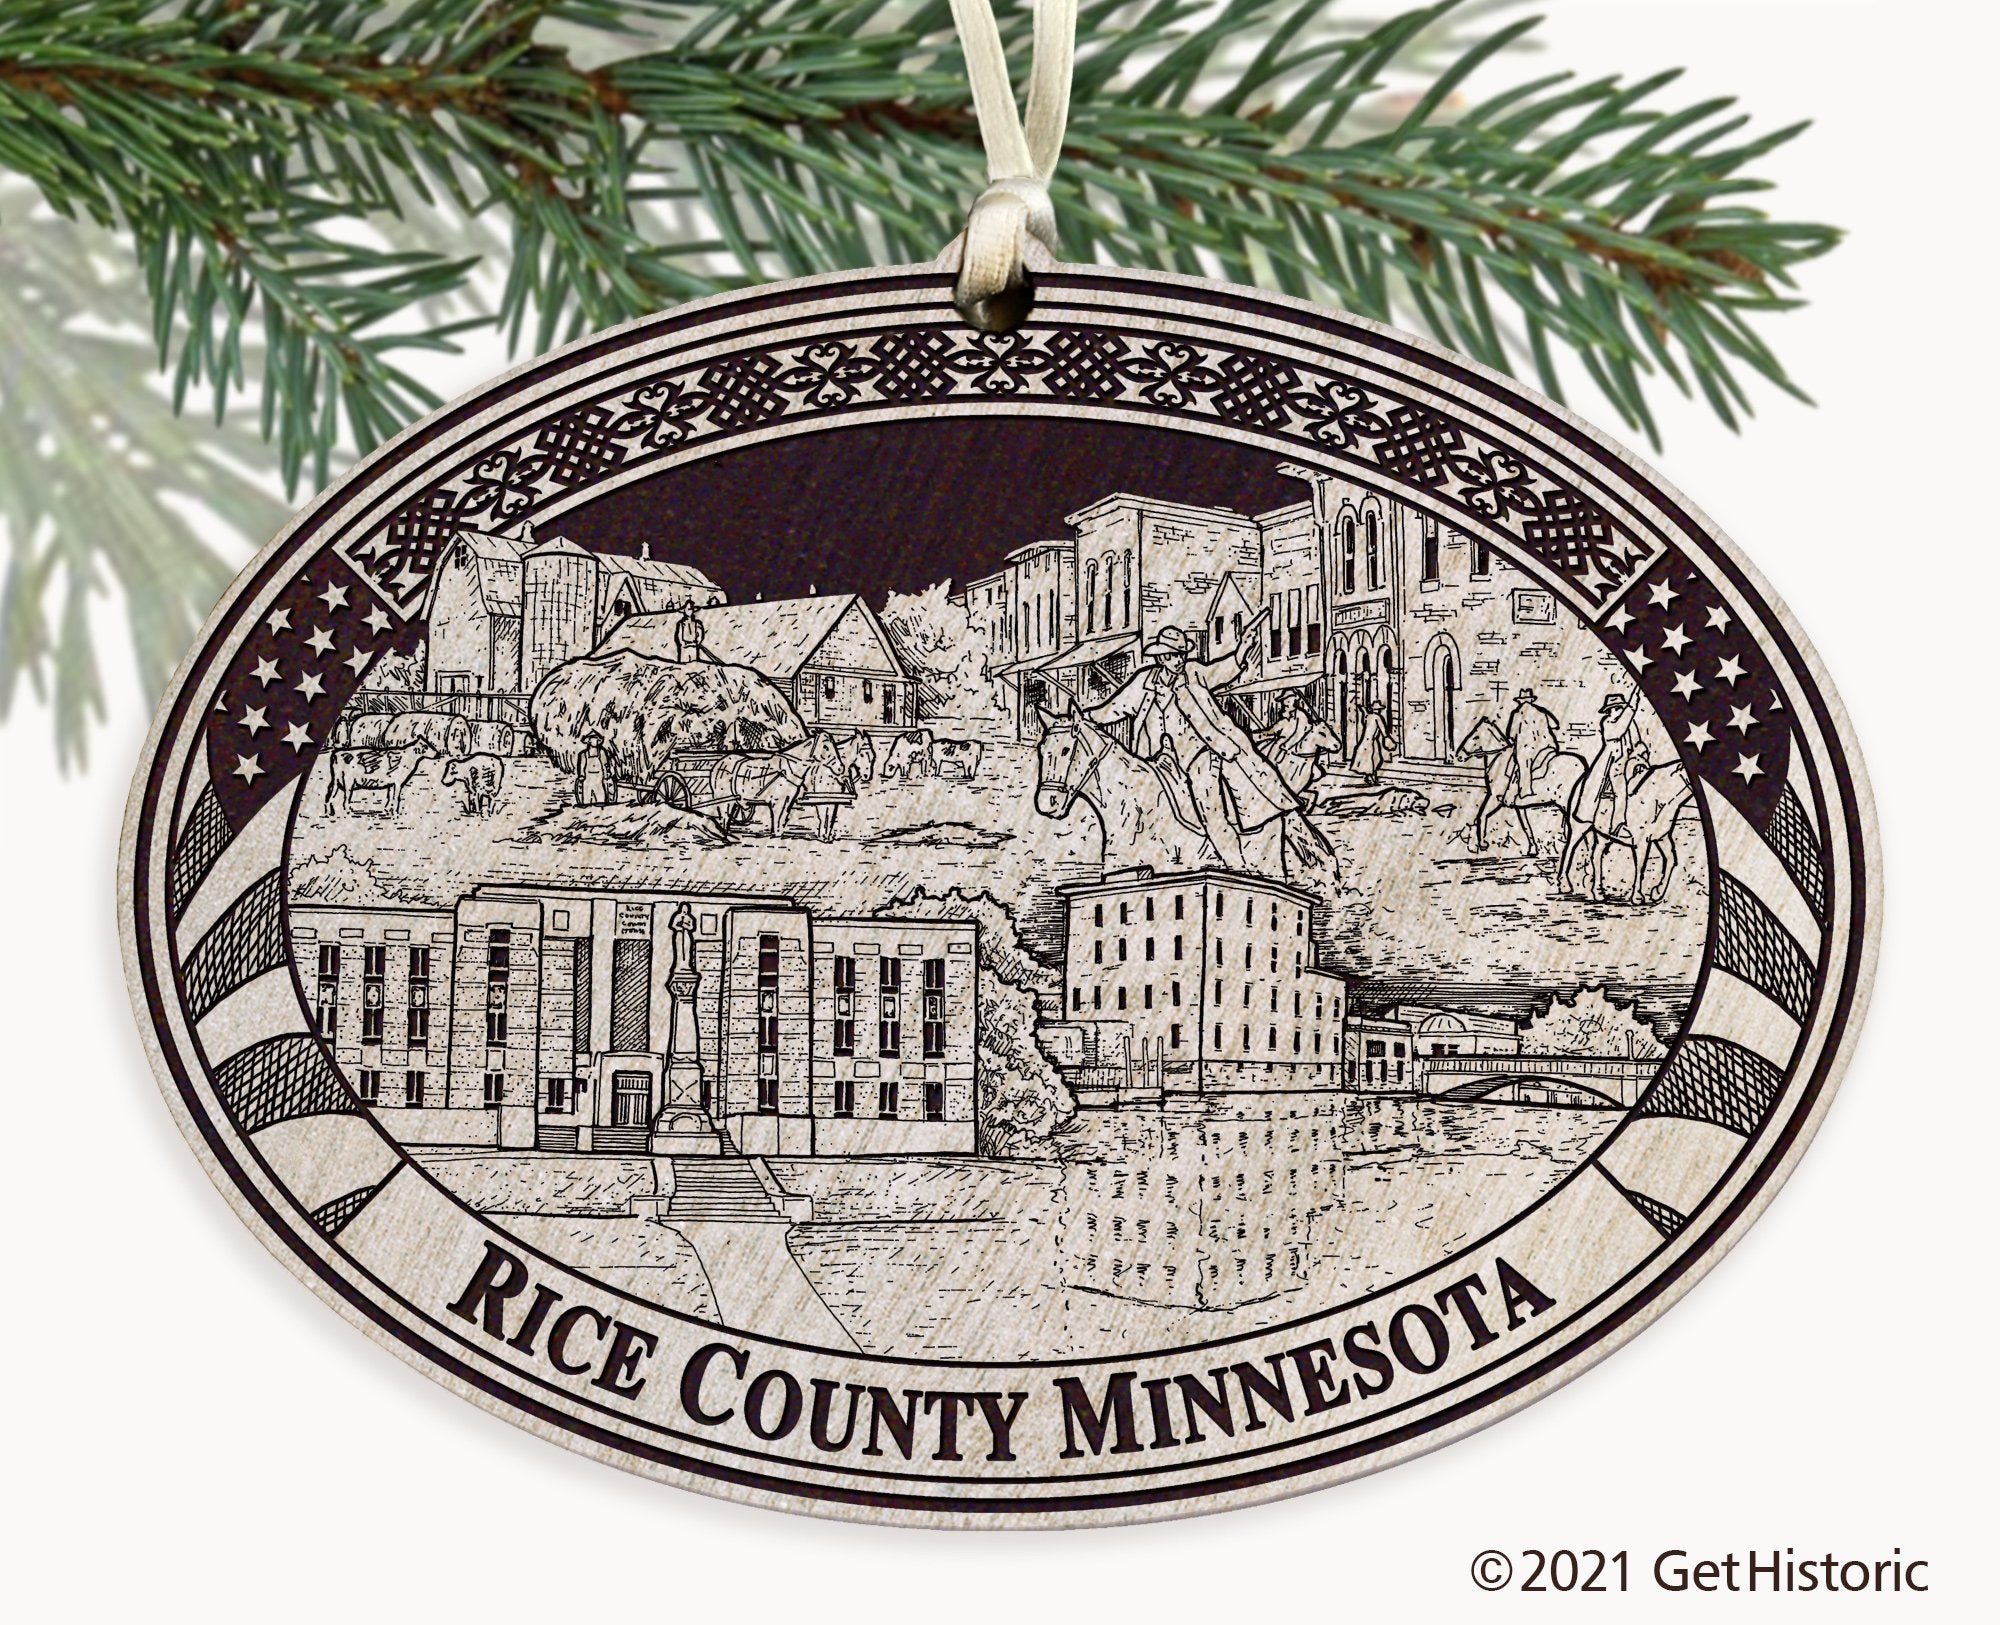 Rice County Minnesota Engraved Ornament